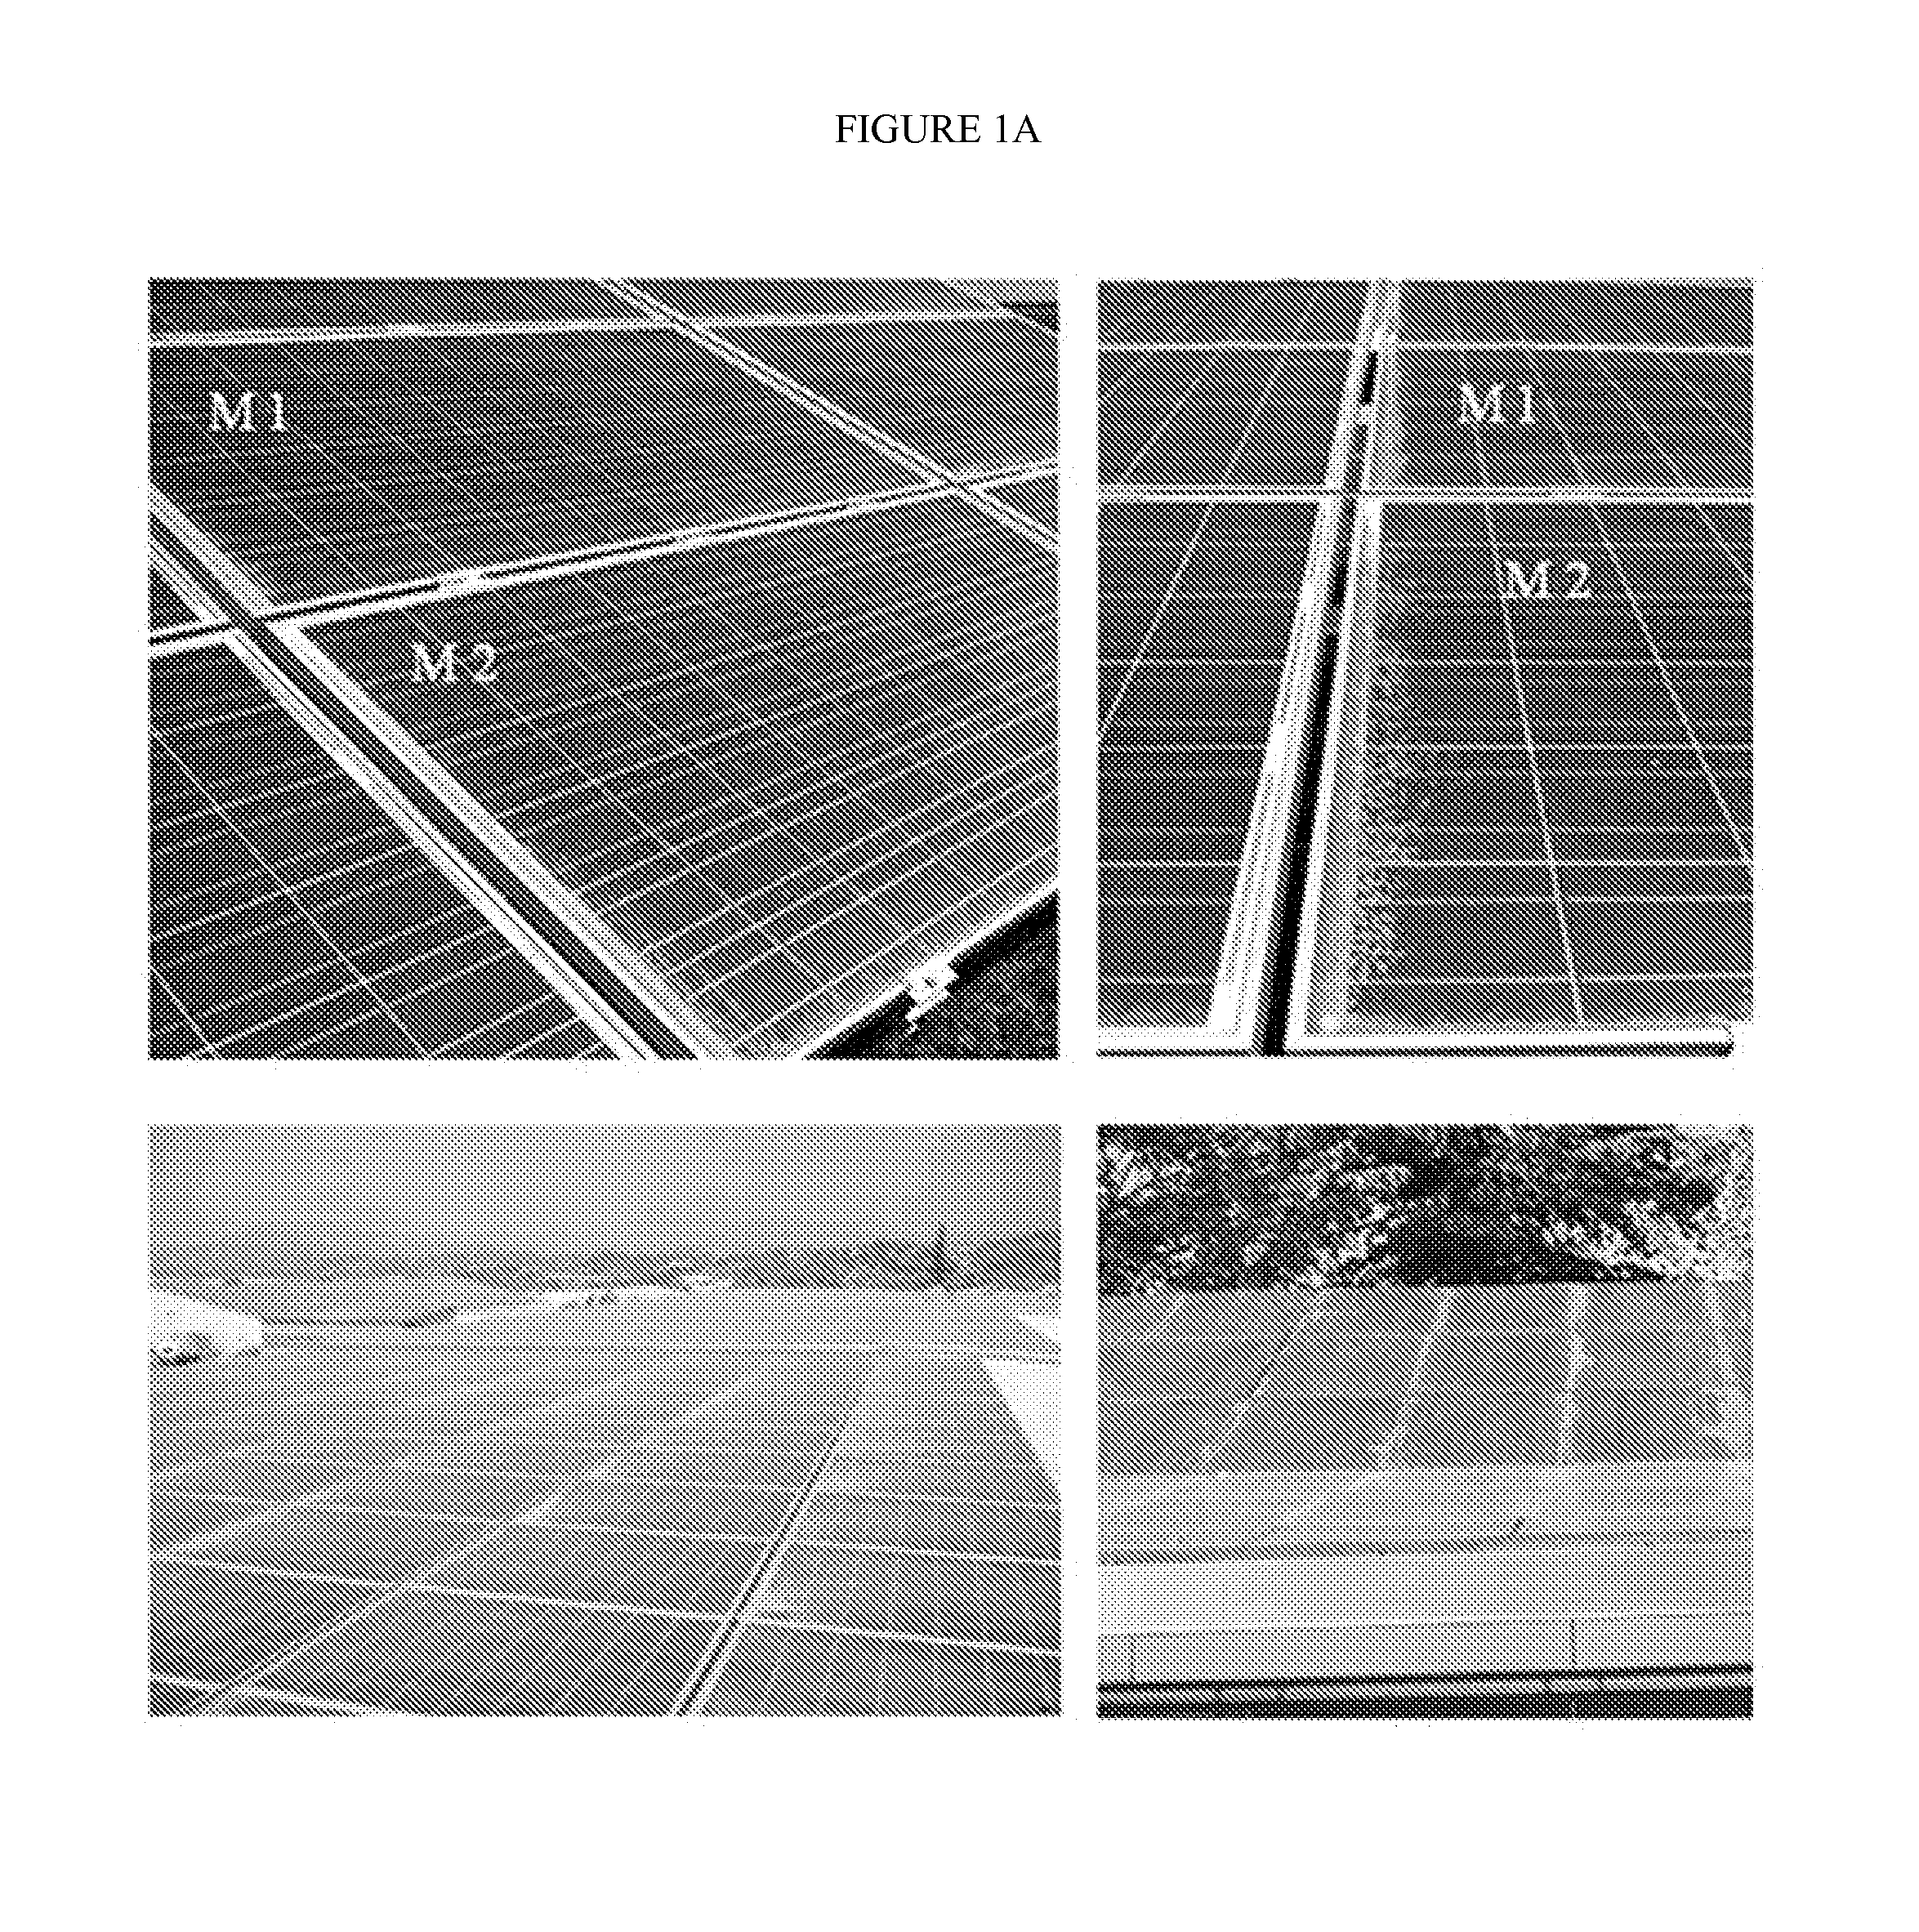 Soiling measurement system for photovoltaic arrays